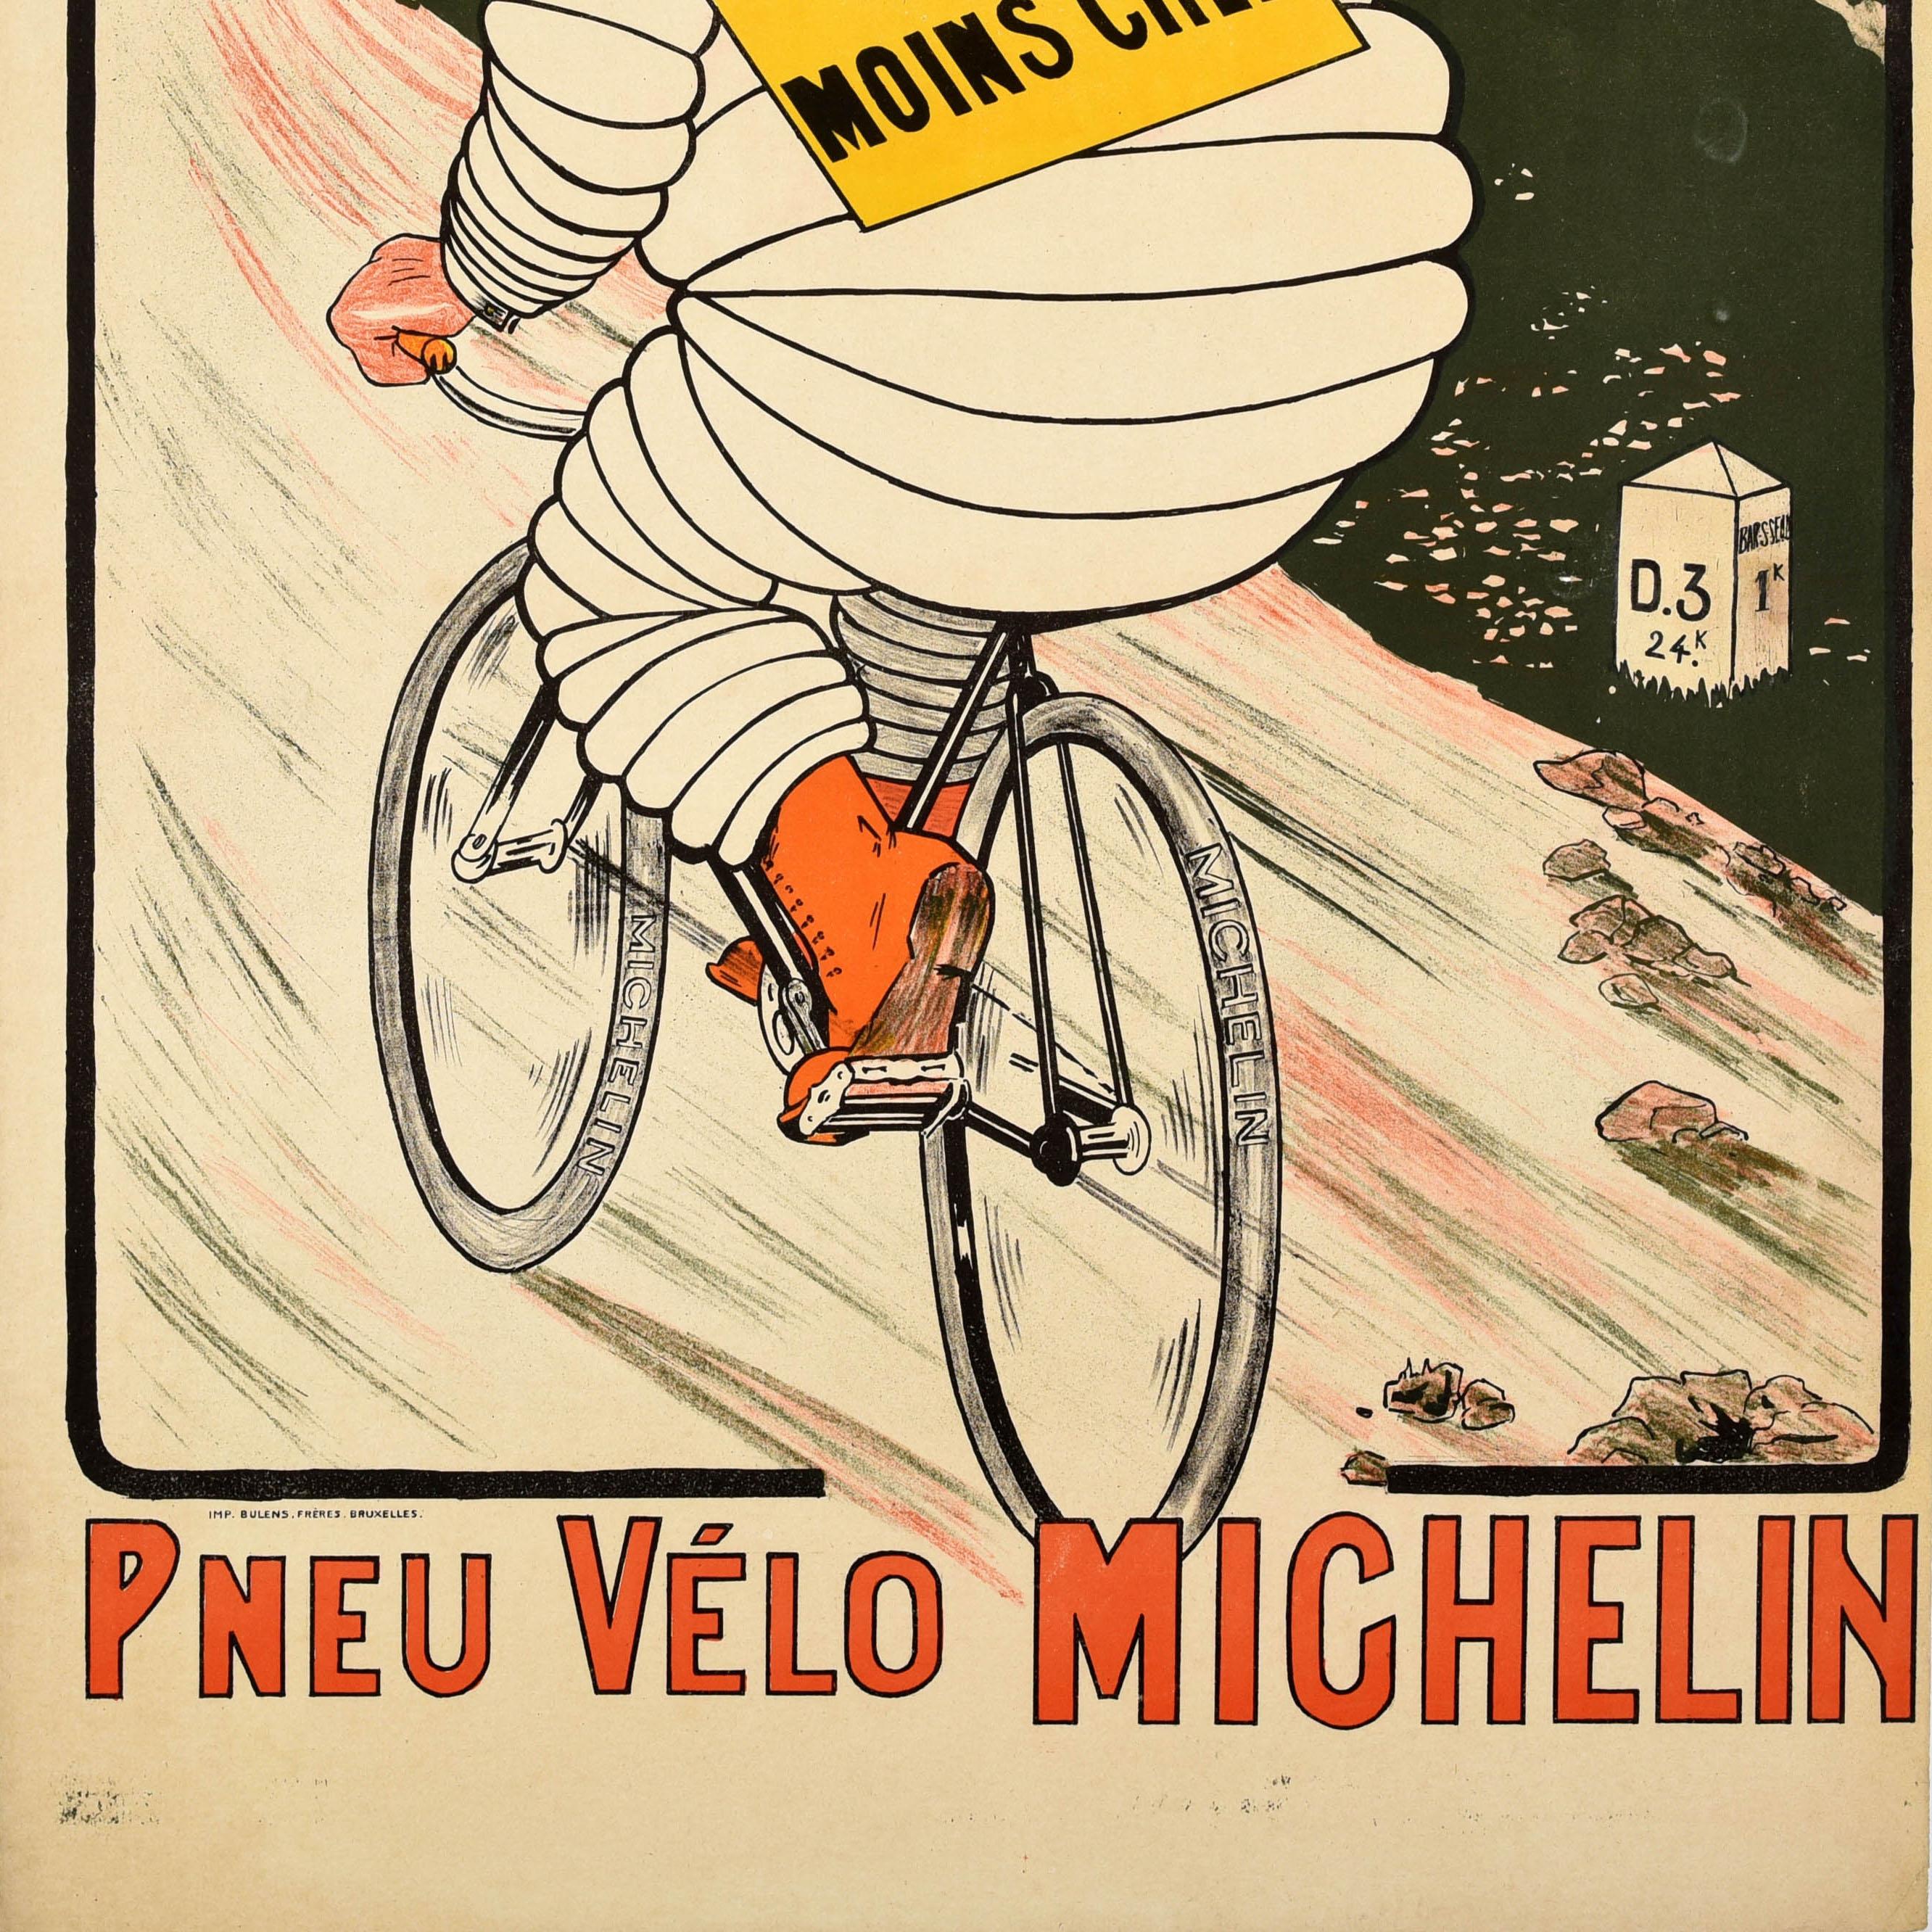 Original antique advertising poster for Michelin tyres featuring a great illustration showing the trademark Bibendum character - the iconic Michelin Man figure made from tyres - smoking a cigar and riding a bicycle at speed along a country road with